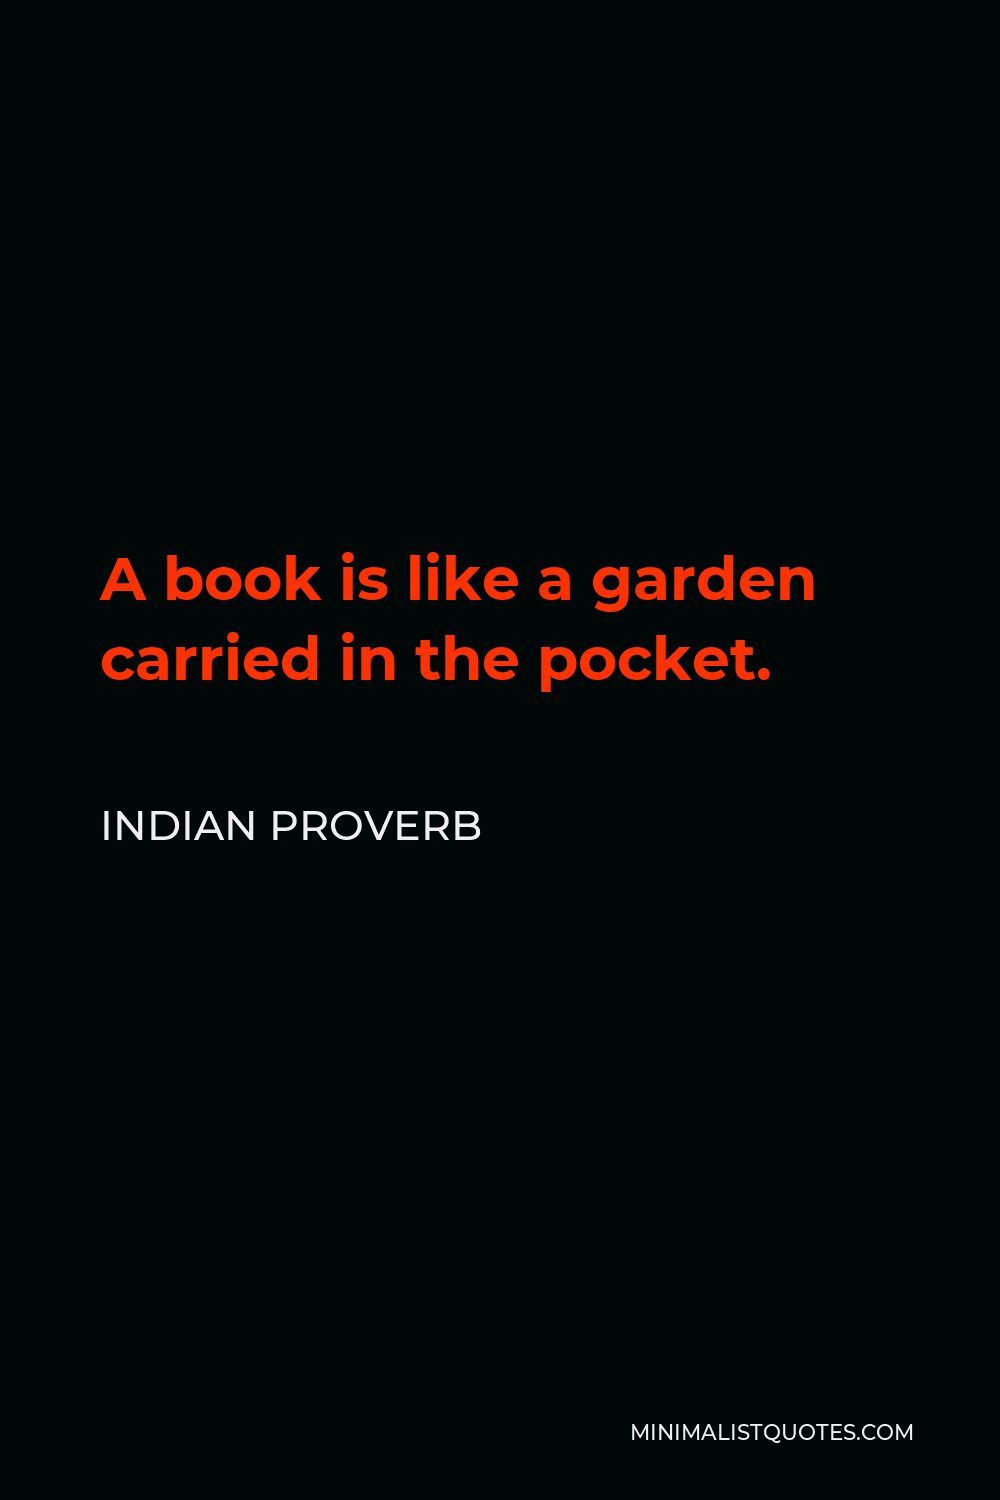 Indian Proverb Quote - A book is like a garden carried in the pocket.